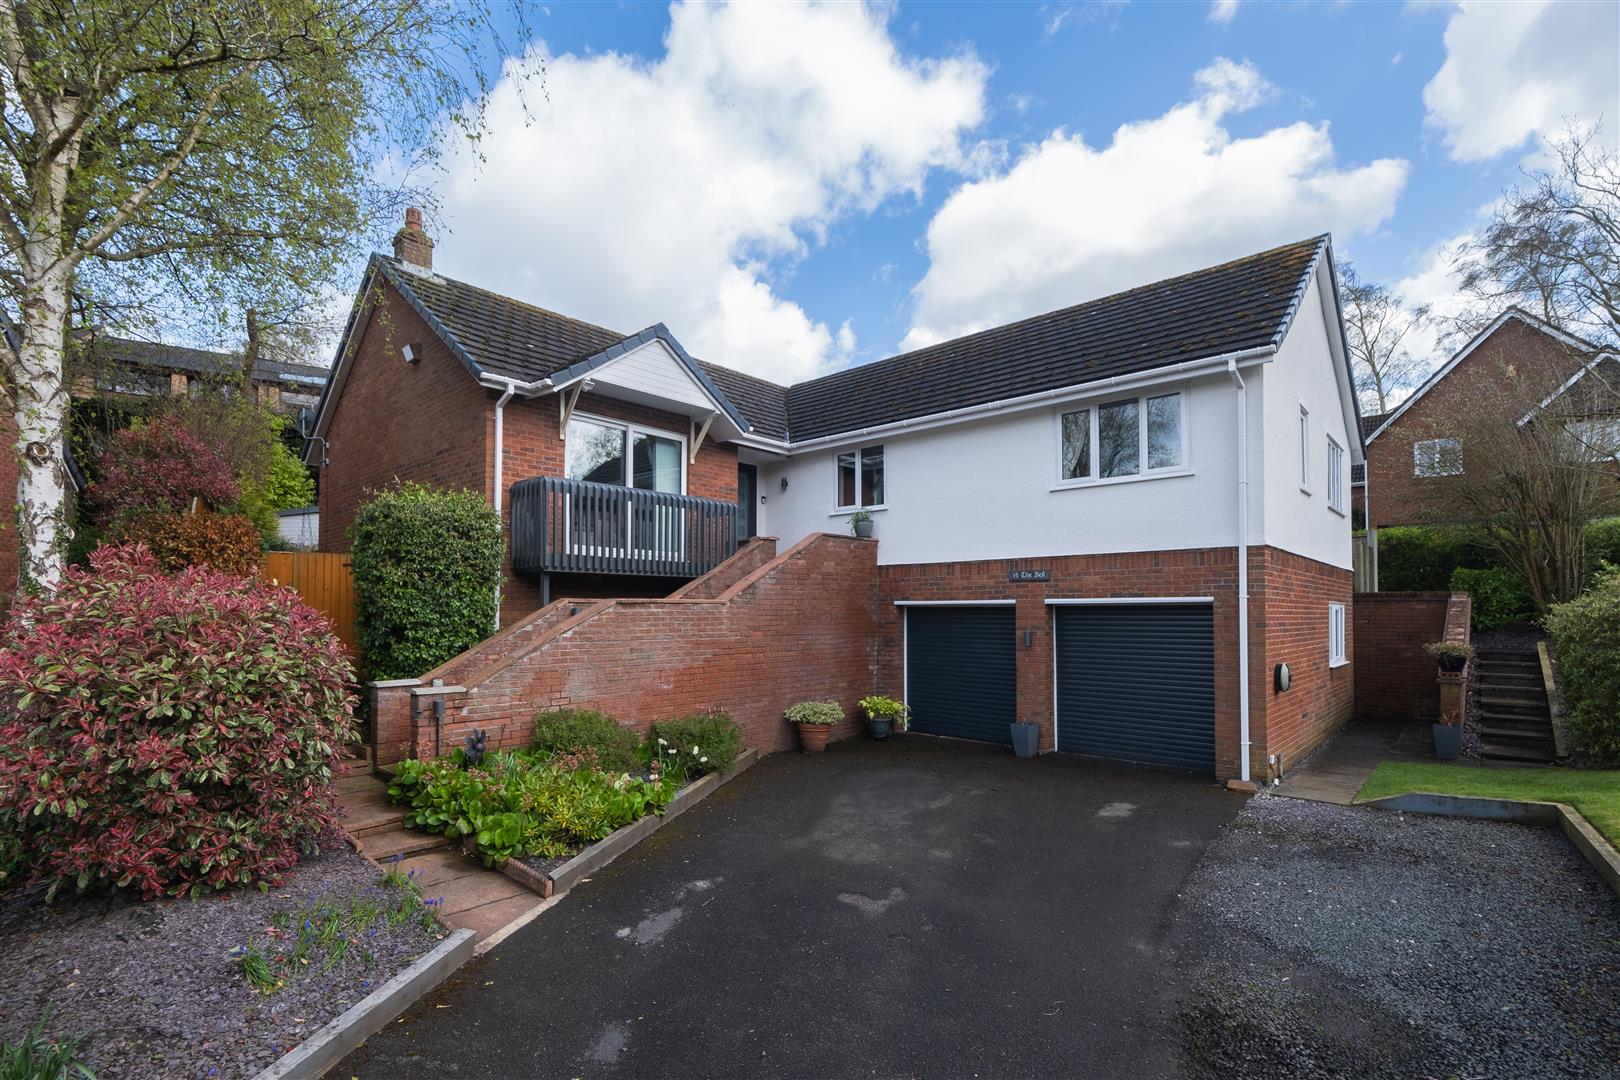 4 bedroom  Detached House for Rental in Northwich